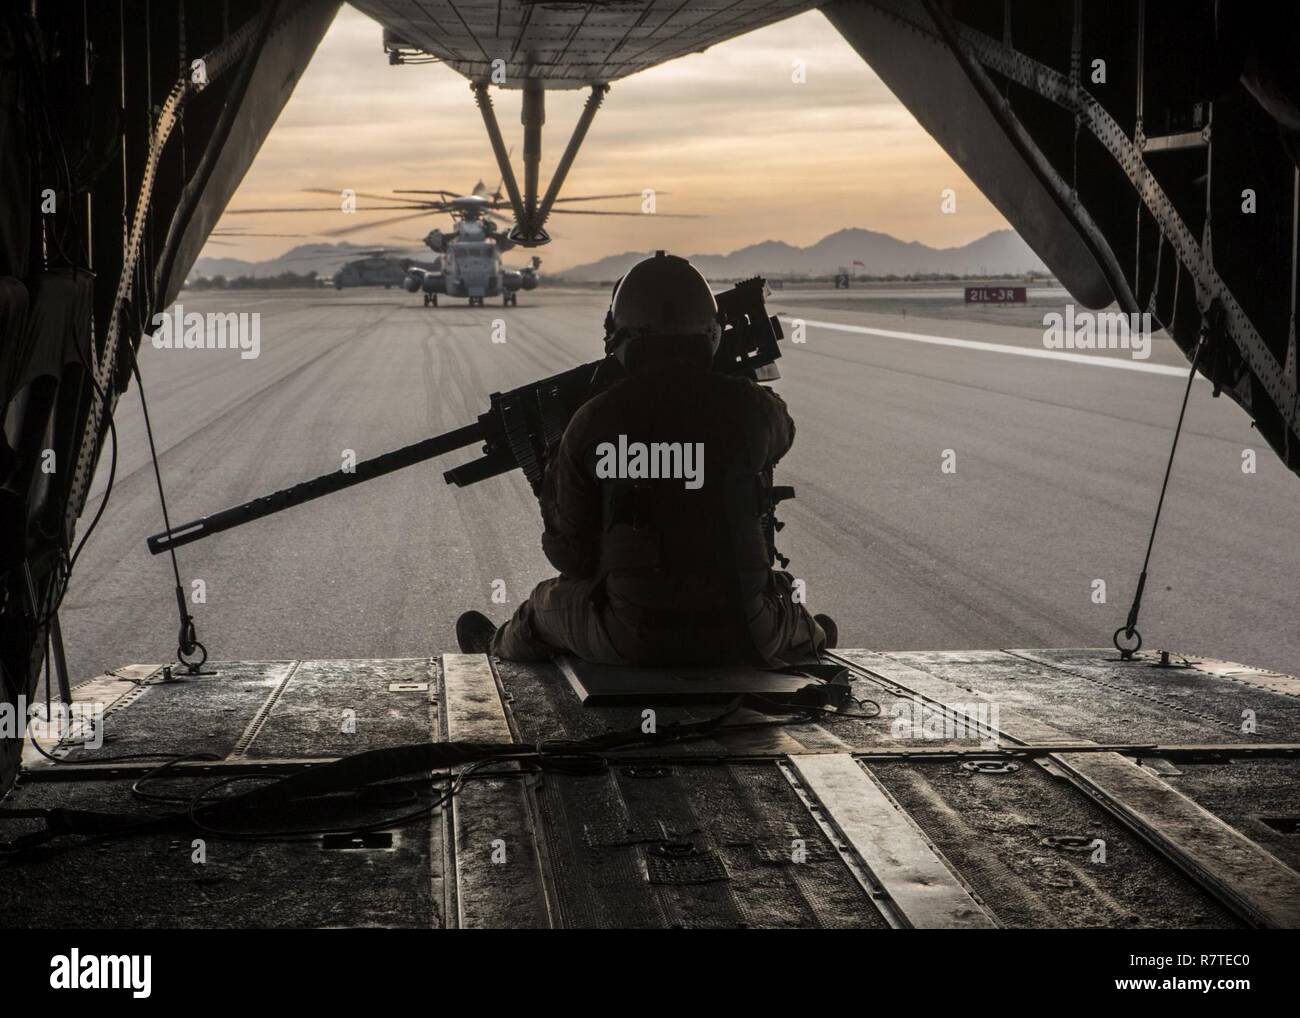 A U.S. Marine prepares for take-off on a CH-53E Super Stallion during a CH-53 day battle drill in support of Weapons and Tactics Instructors course (WTI) 2-17 at Marine Corps Air Station Yuma, Ariz., April 8, 2017. WTI is a seven-week training event hosted by Marine Aviation Weapons and Tactics Squadron One (MAWTS-1) cadre, which emphasizes operational integration of the six functions of Marine Corps aviation in support of a Marine Air Ground Task Force and provides standardized advanced tactical training and certification of unit instructor qualifications to support Marine Aviation Training a Stock Photo